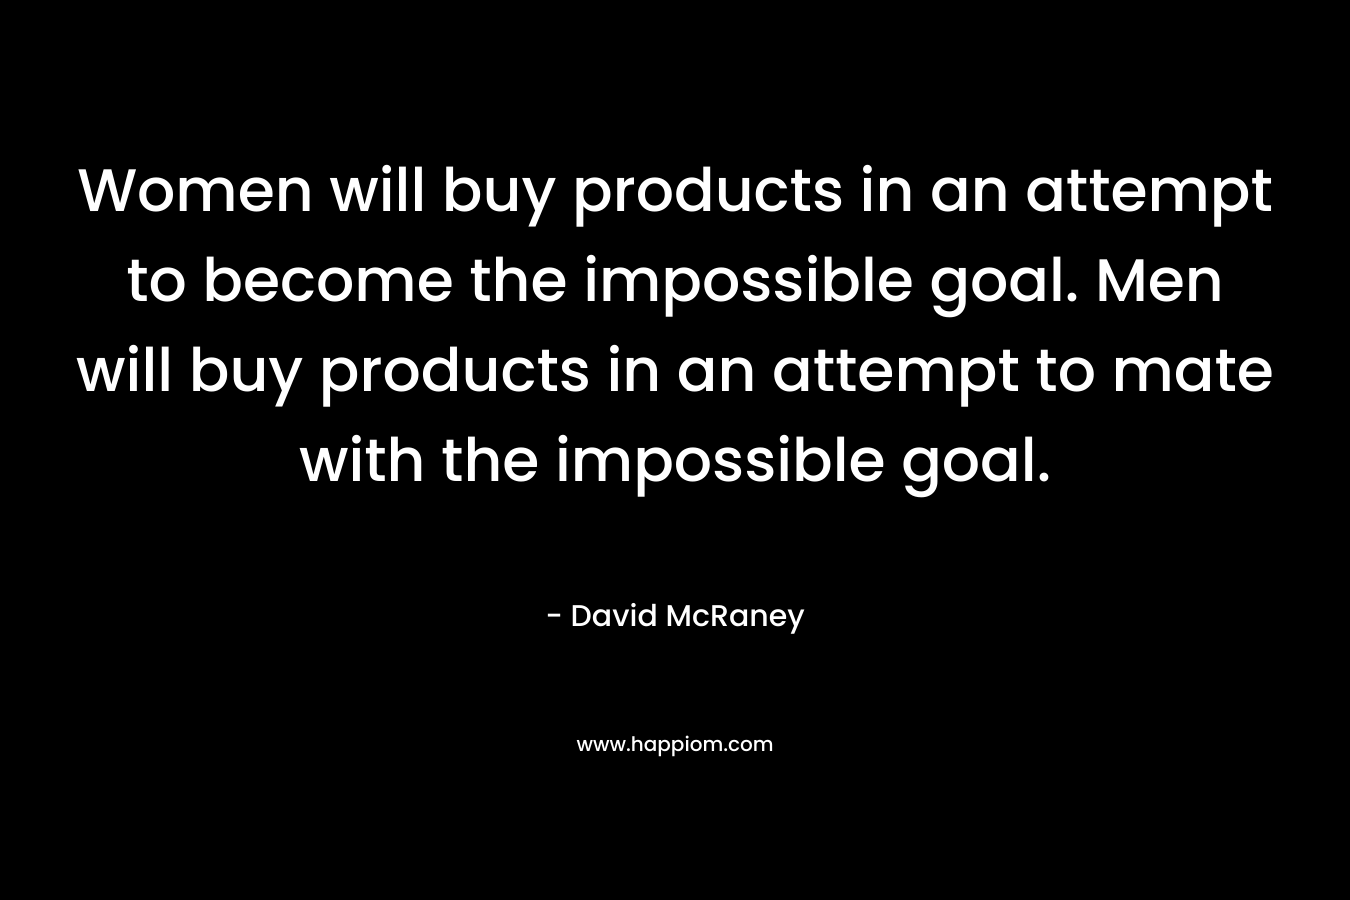 Women will buy products in an attempt to become the impossible goal. Men will buy products in an attempt to mate with the impossible goal.